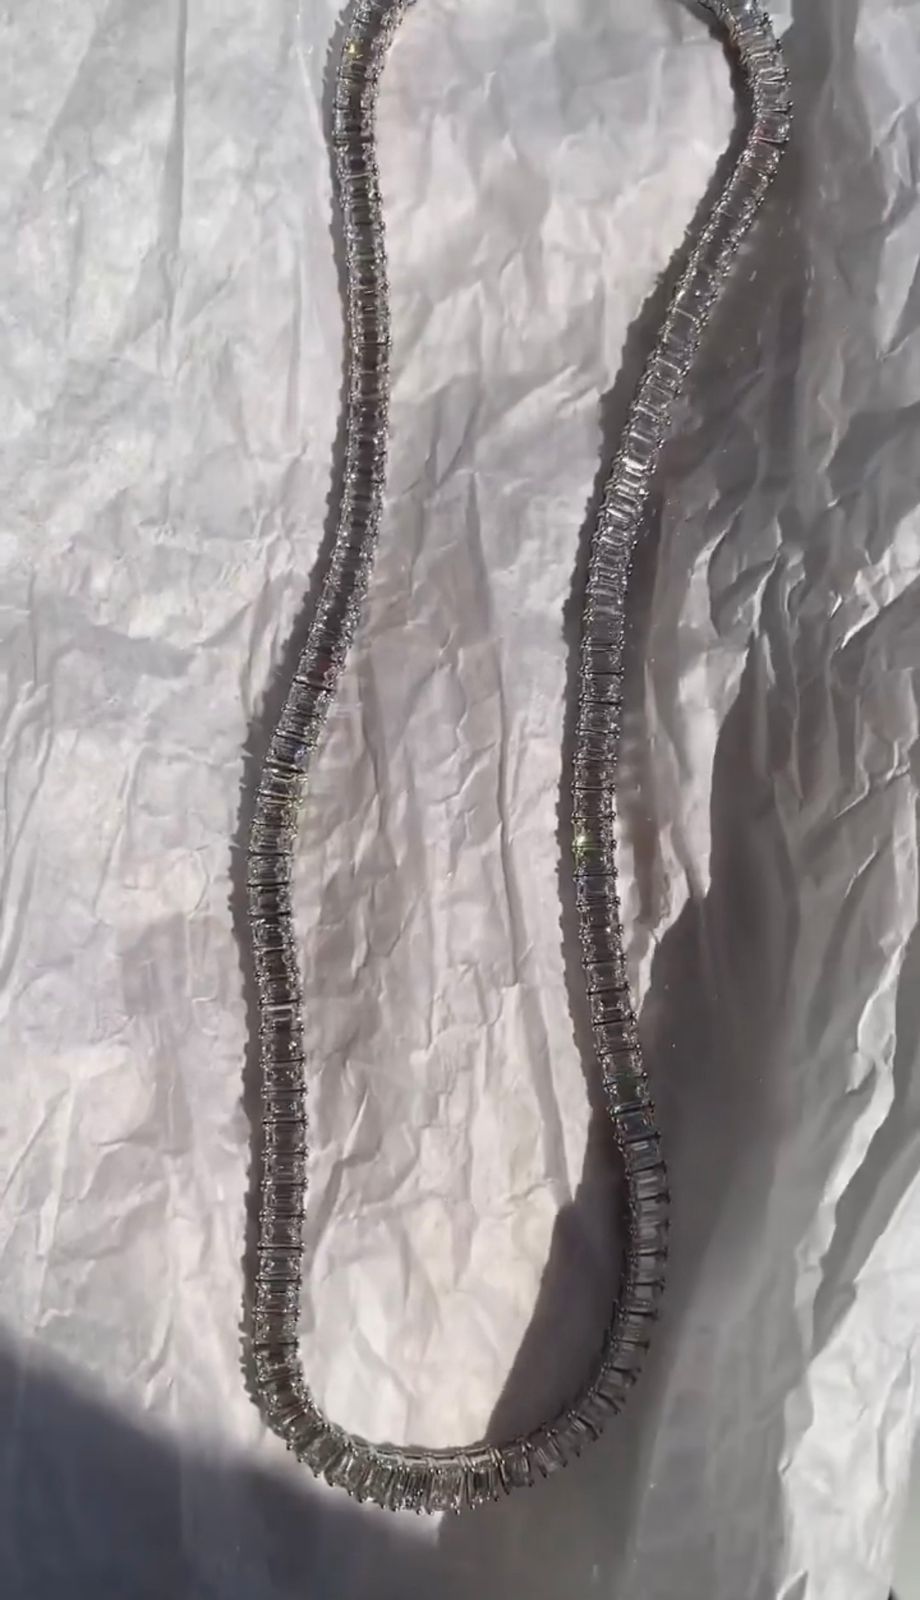 RARE PRINCE by CARAT SUTRA | 22" Long Tennis Chain Studded with AAA+ Swarovski Diamonds | 925 Sterling Silver Chain | Men's Jewelry | With Certificate of Authenticity and 925 Hallmark - caratsutra